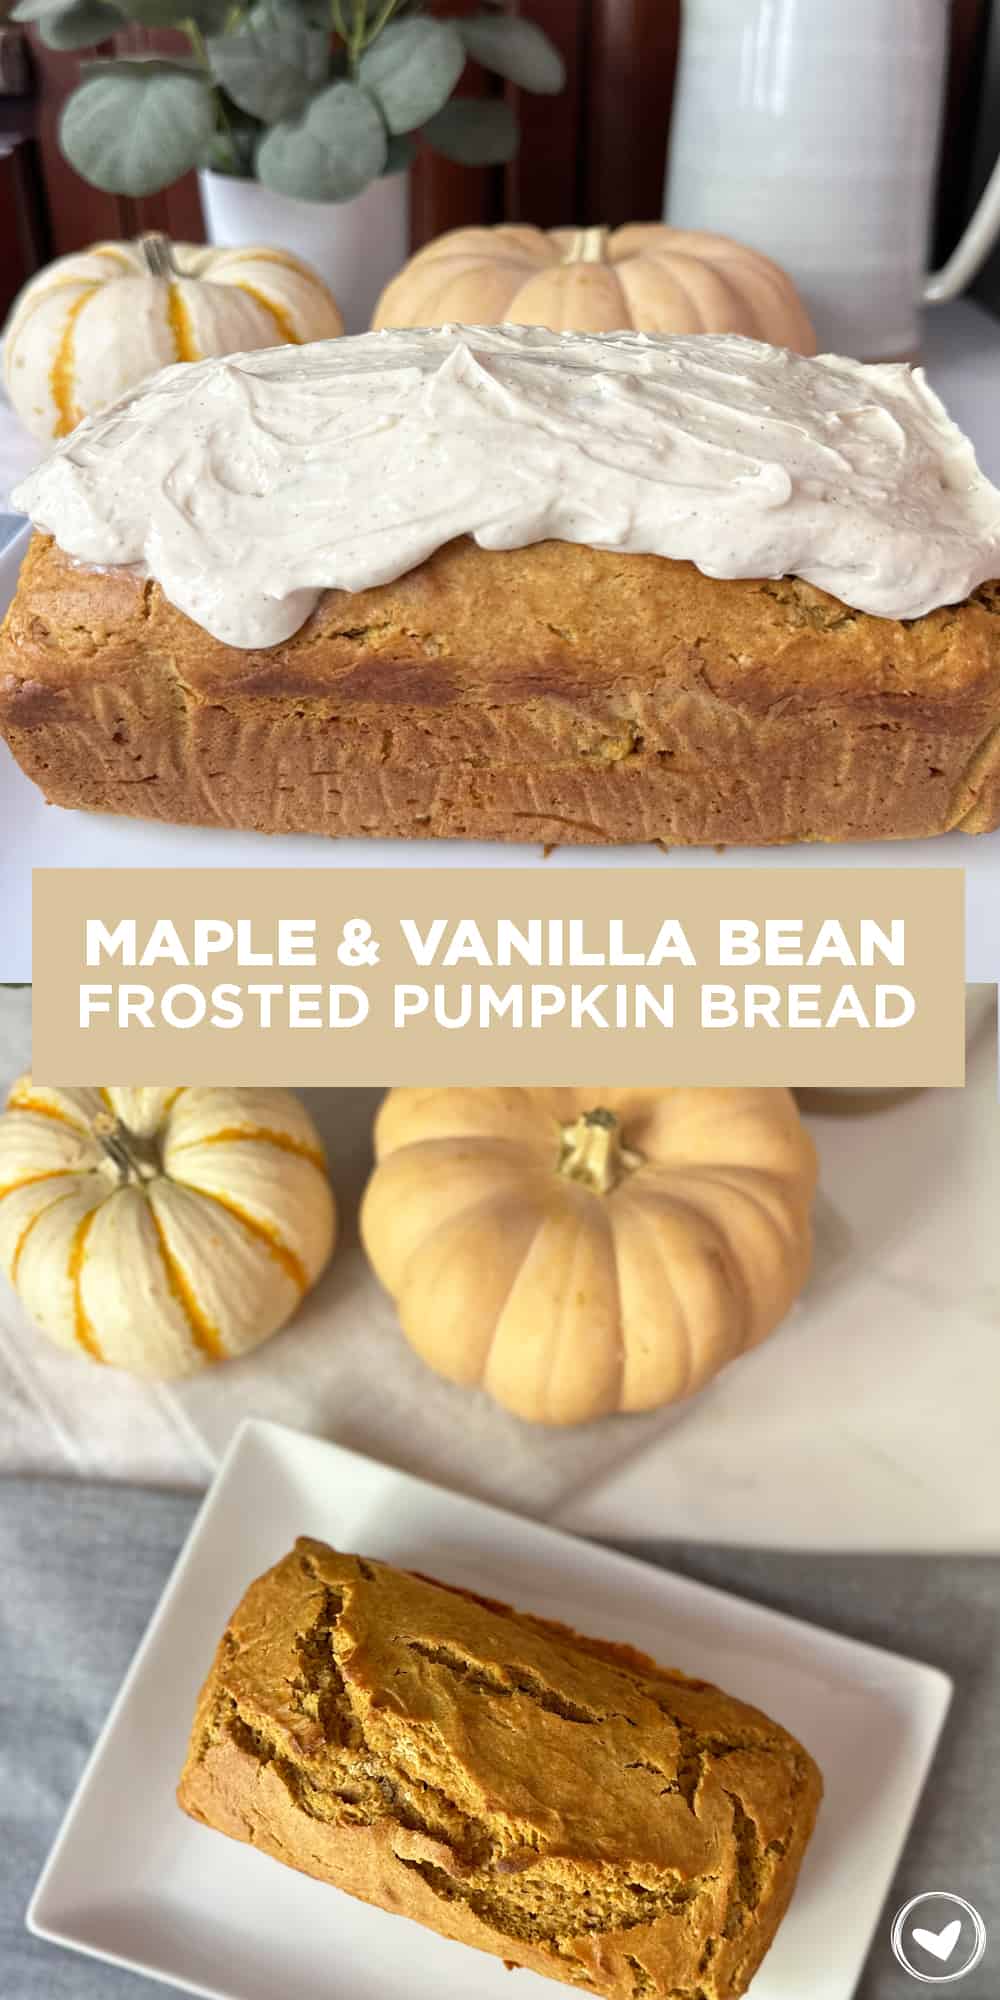 Maple and Vanilla Bean Frosted Pumpkin Bread